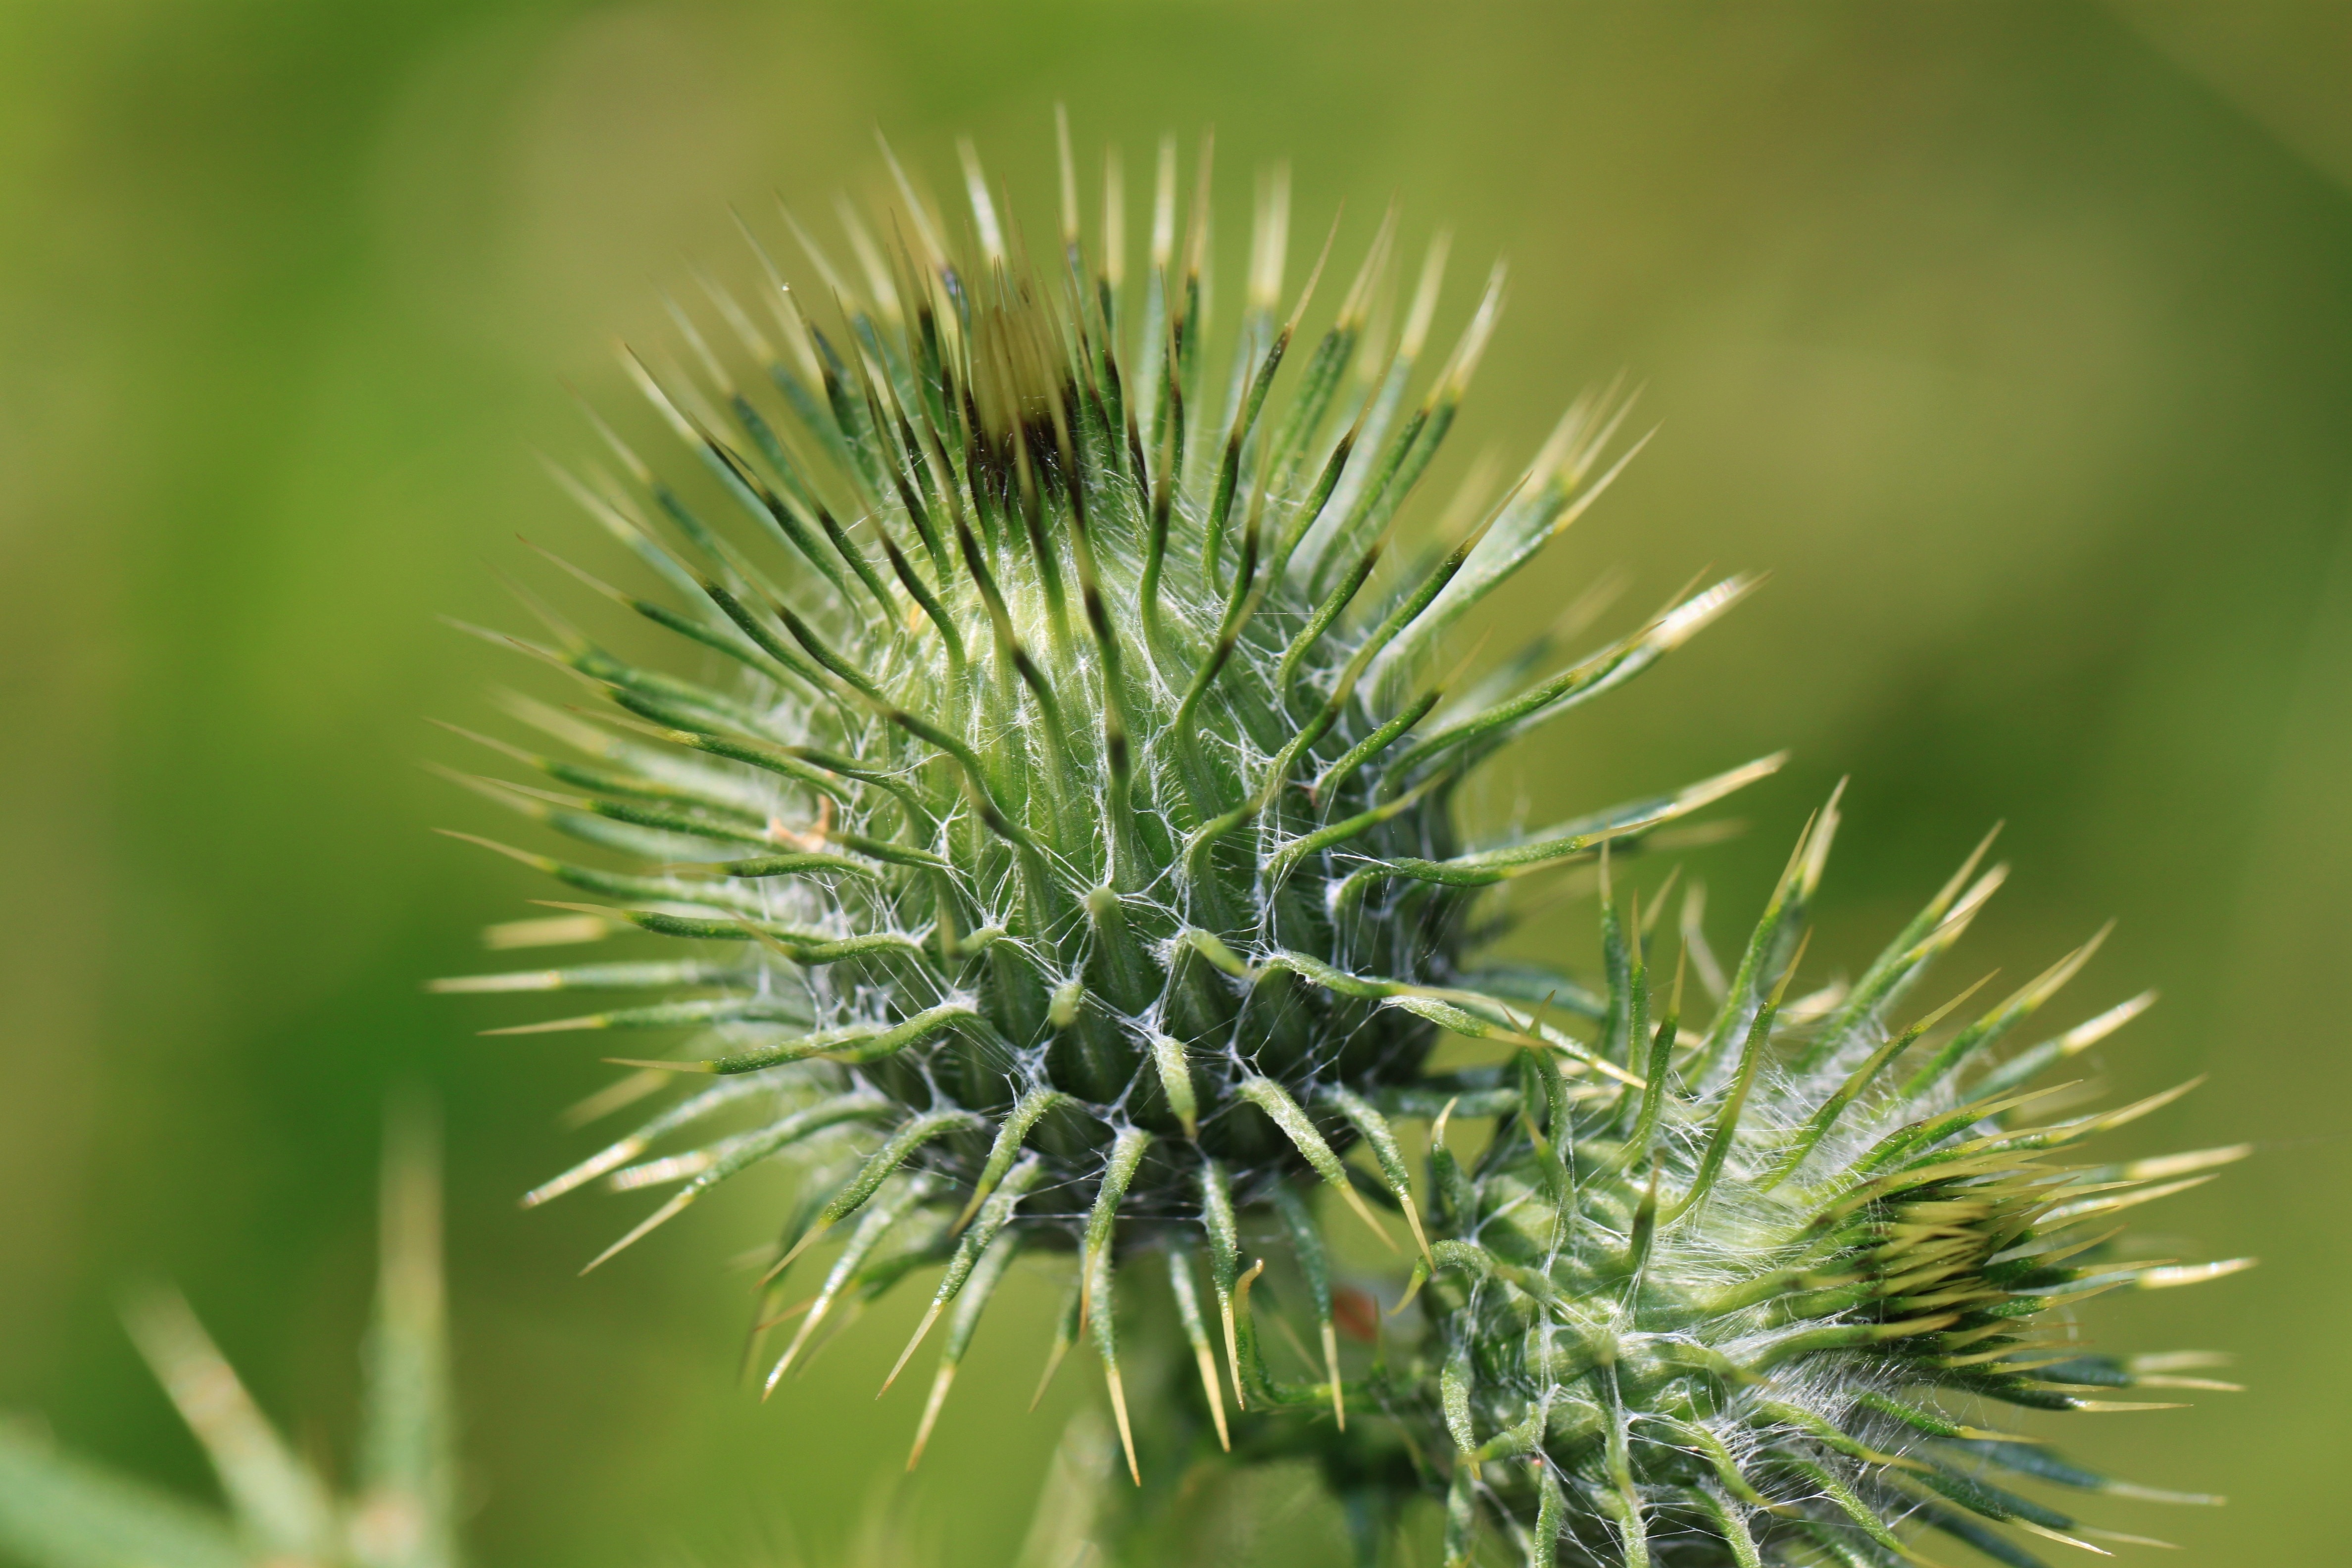 Thistle Flower, Thistle, Prickly, Plant, nature, green color